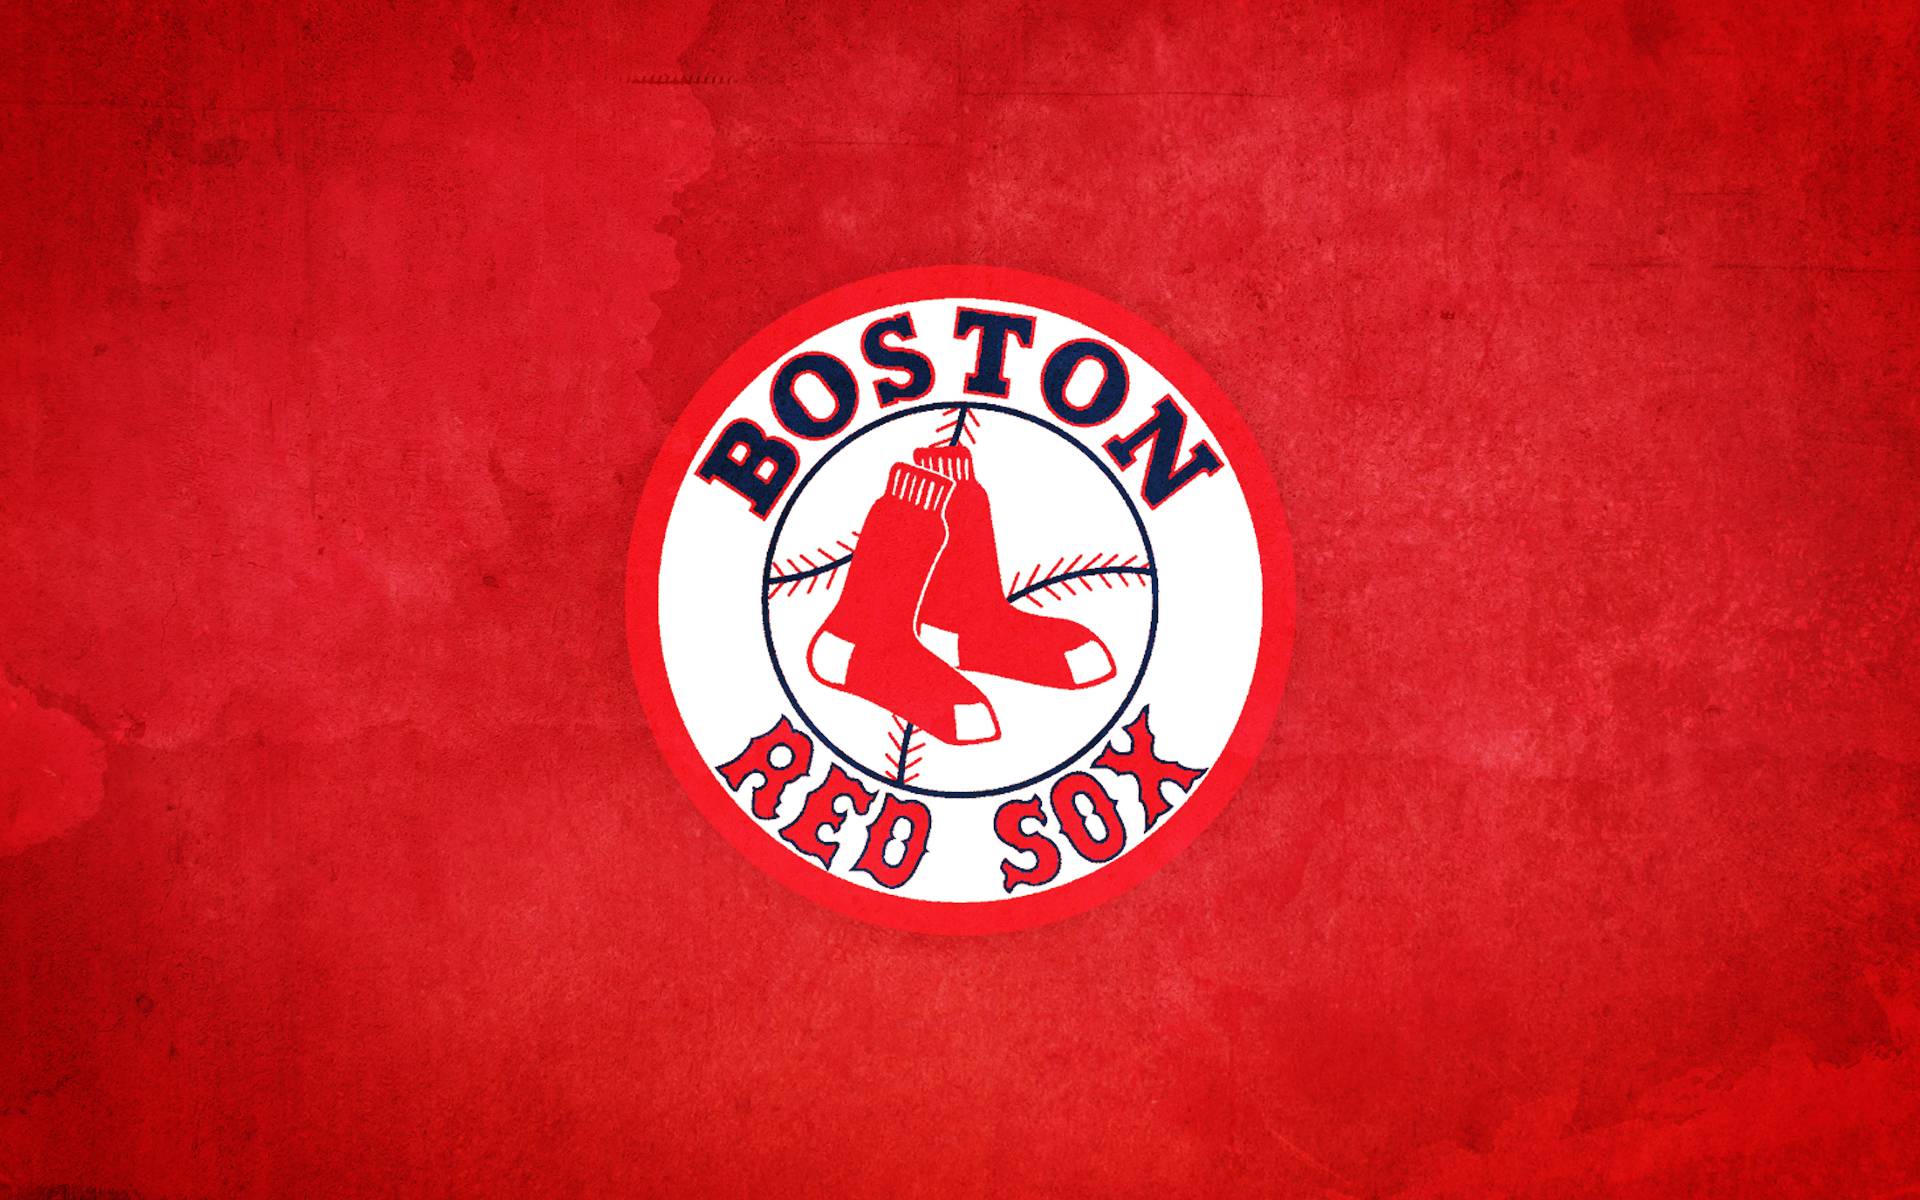 Boston Red Sox wallpapers